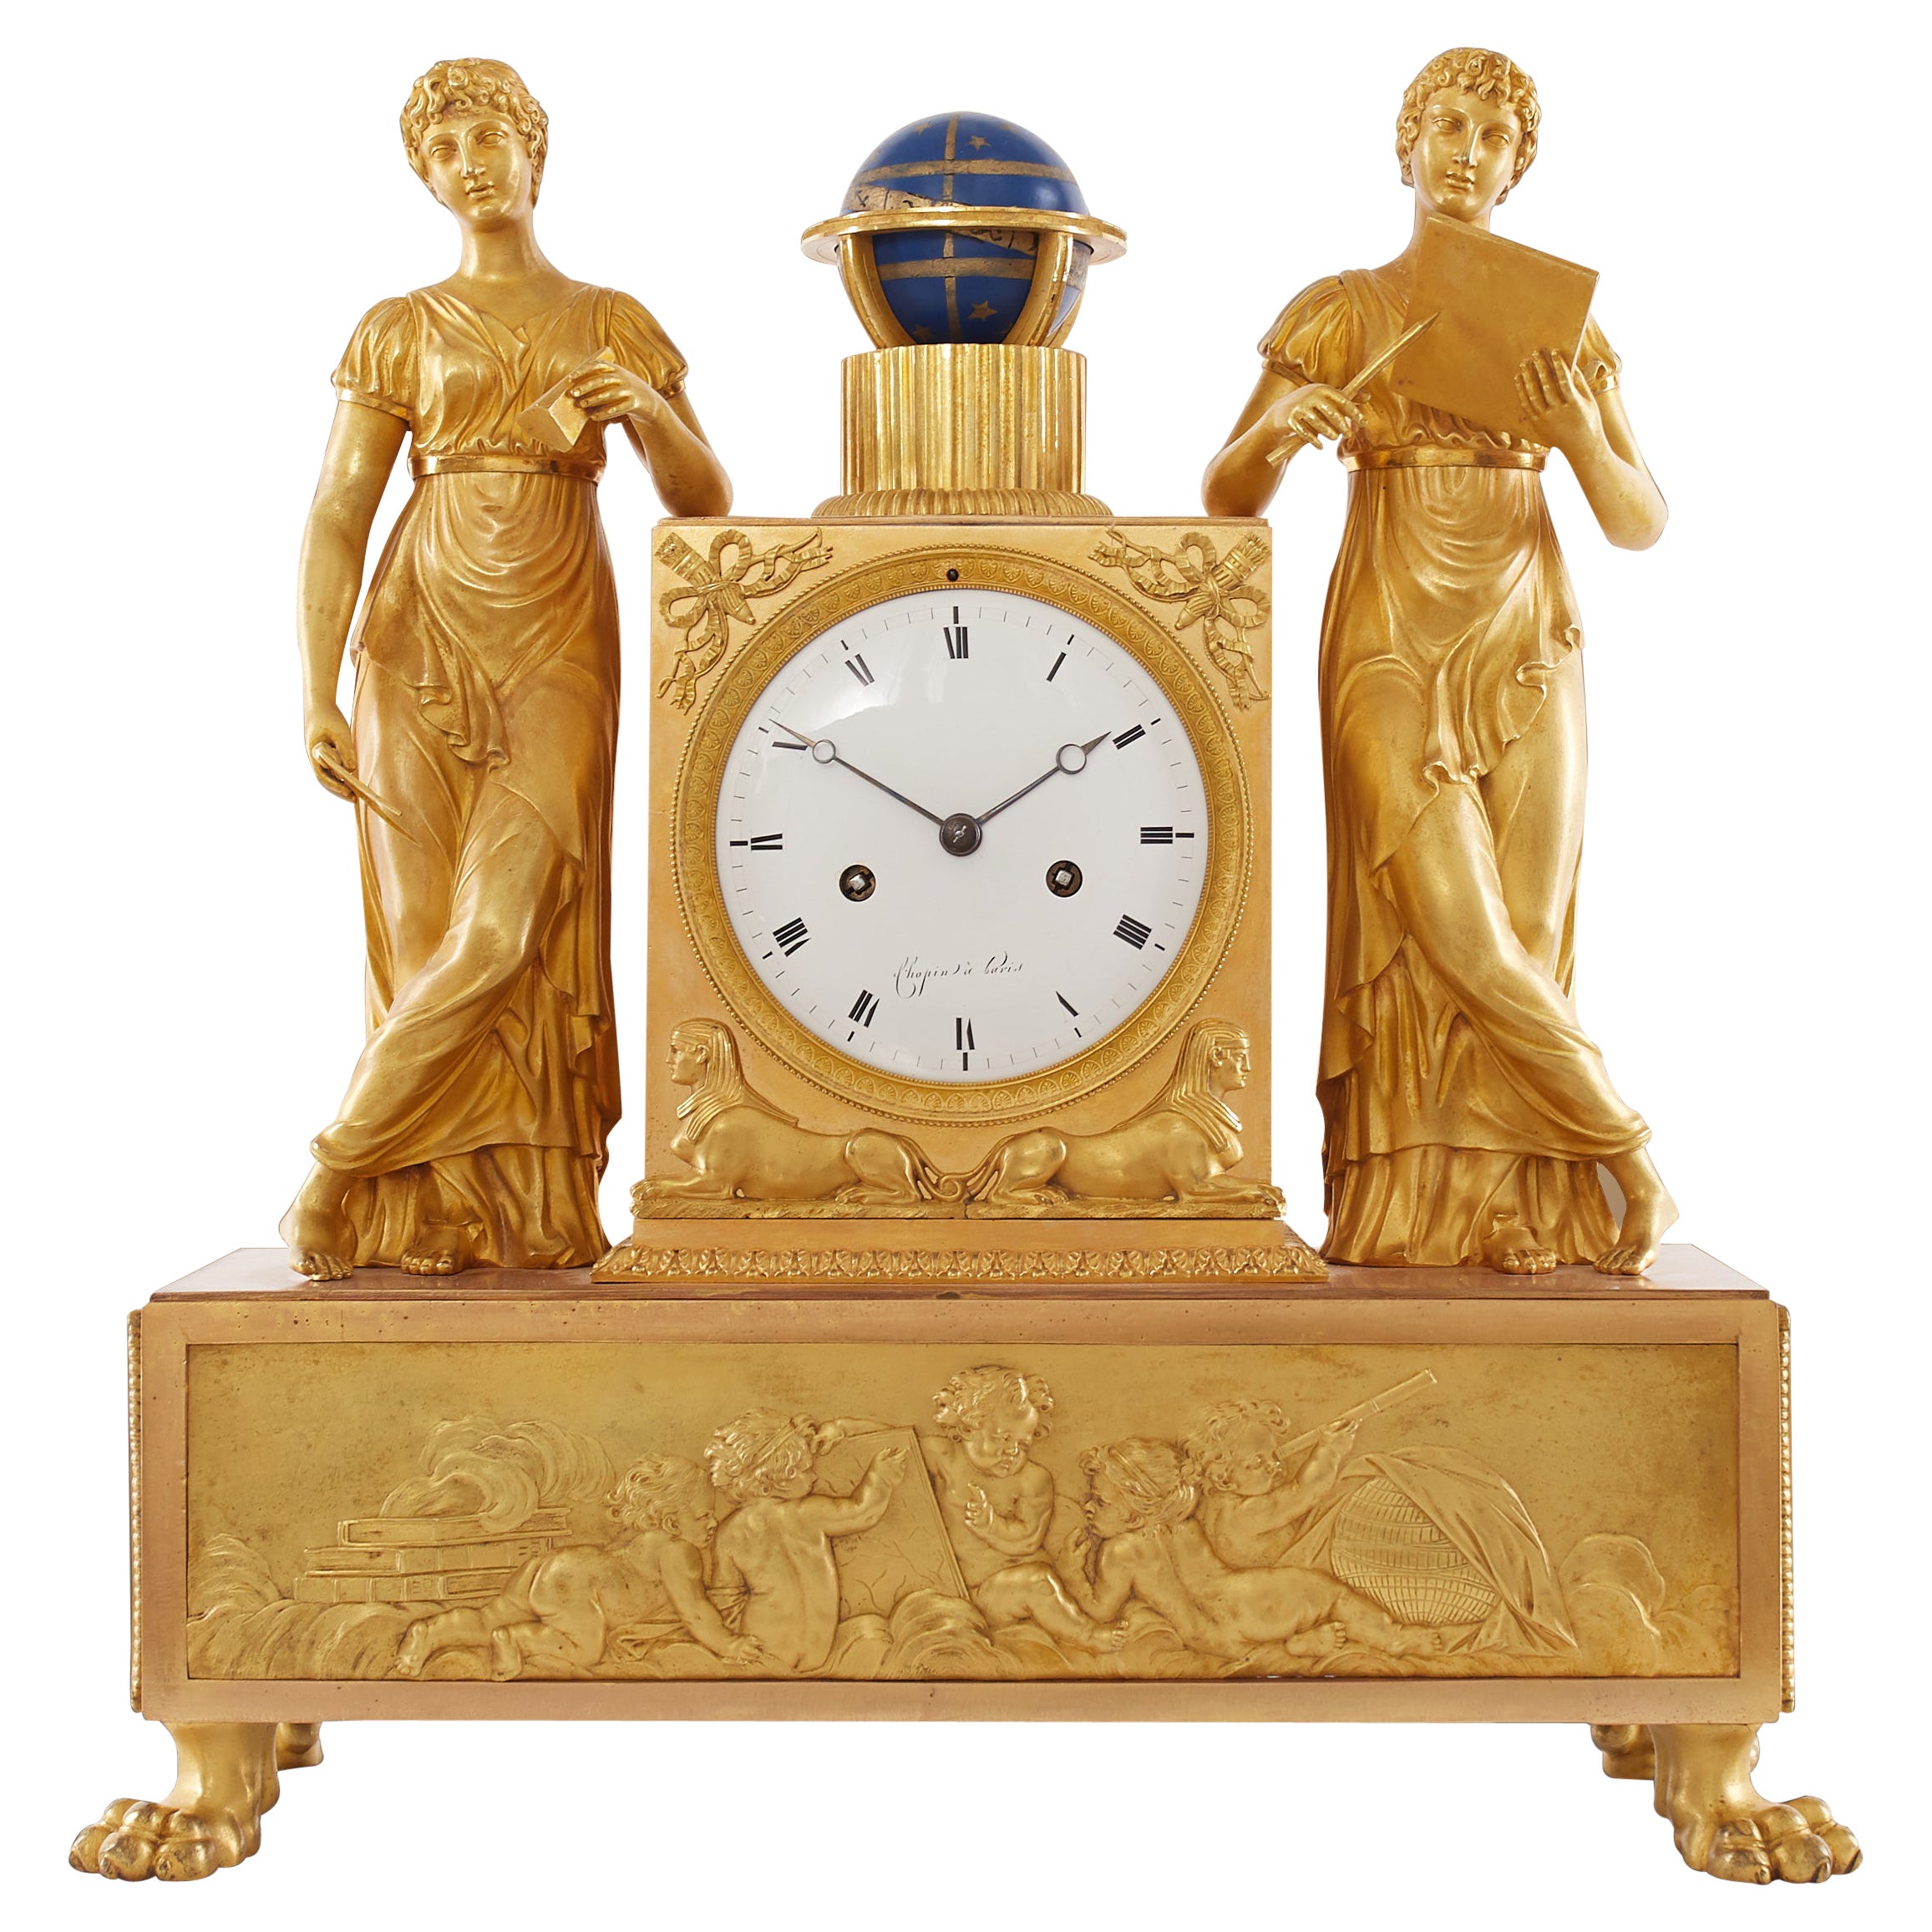 Empire Mantel Clock in Gilt Bronze Depicting "Allegory of Astronomy"